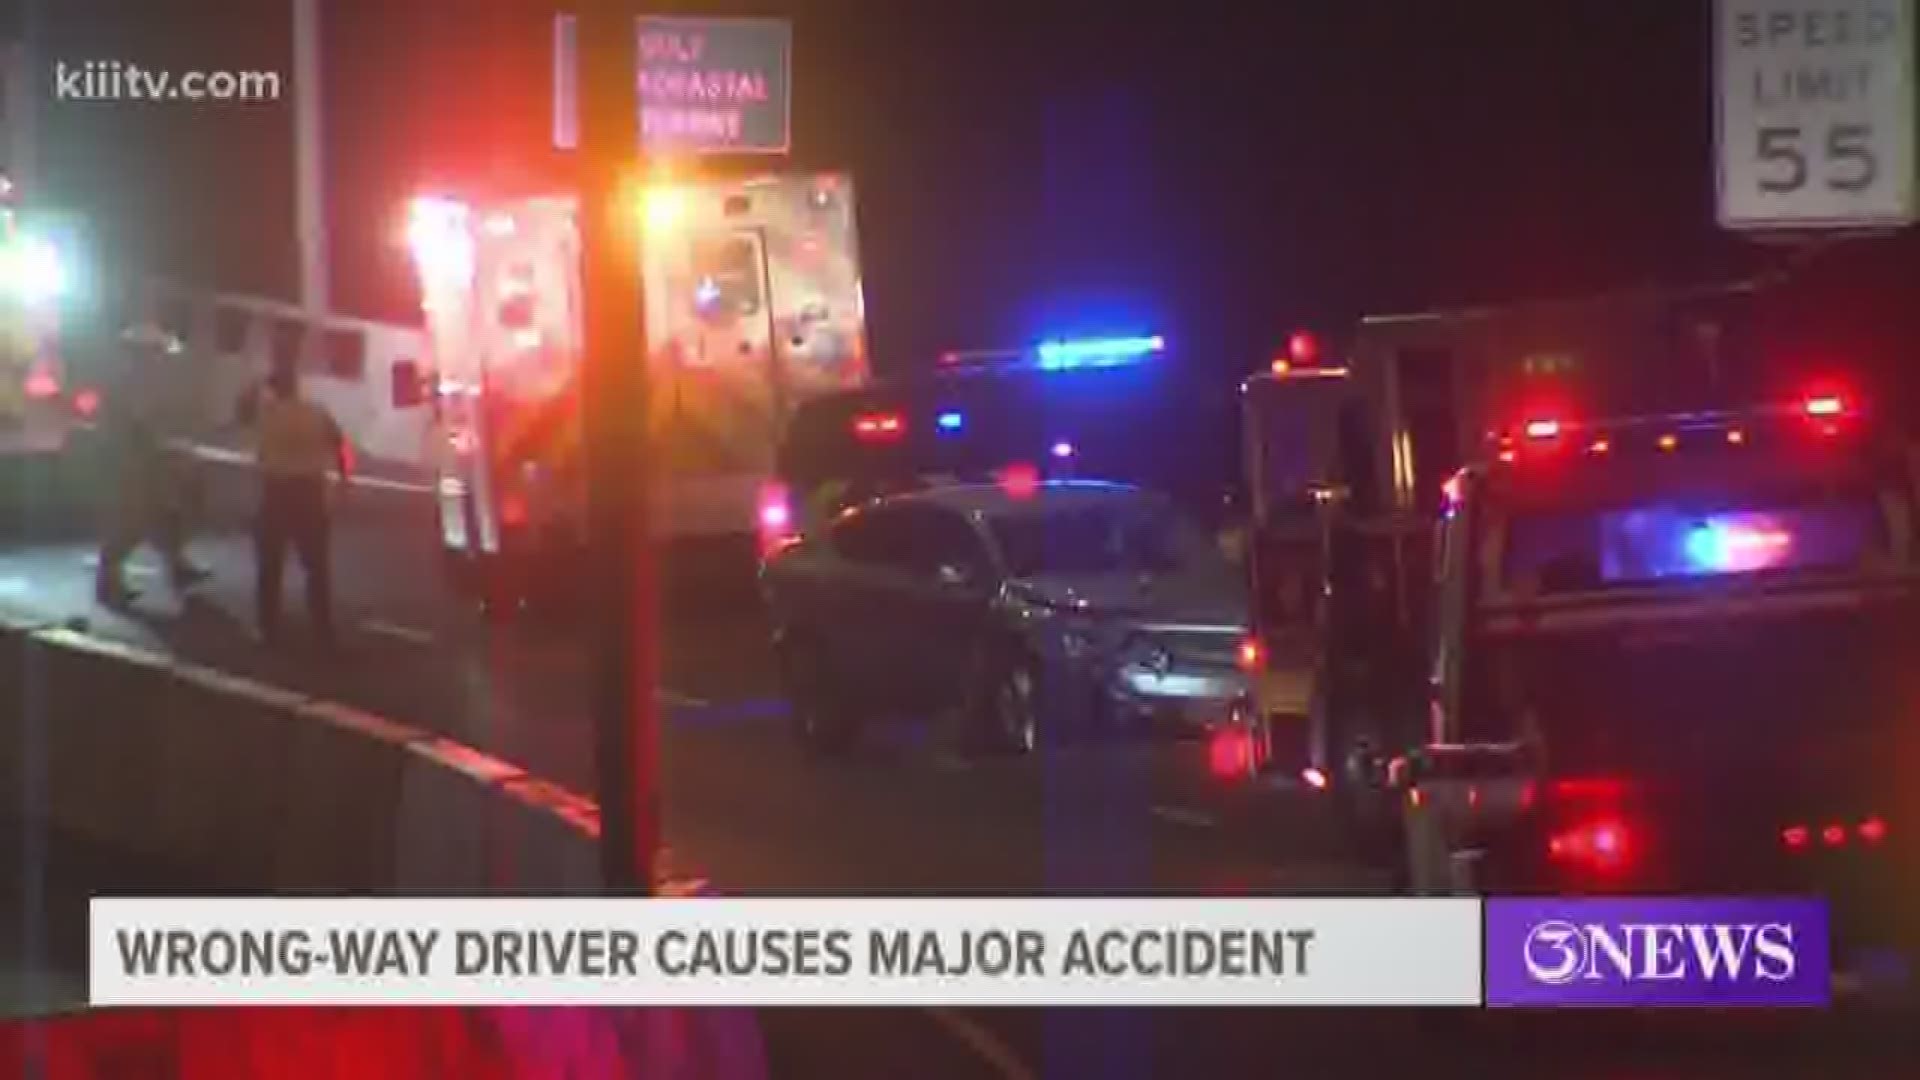 Police tell 3News the driver of that car crashed into another car, injuring two people inside.